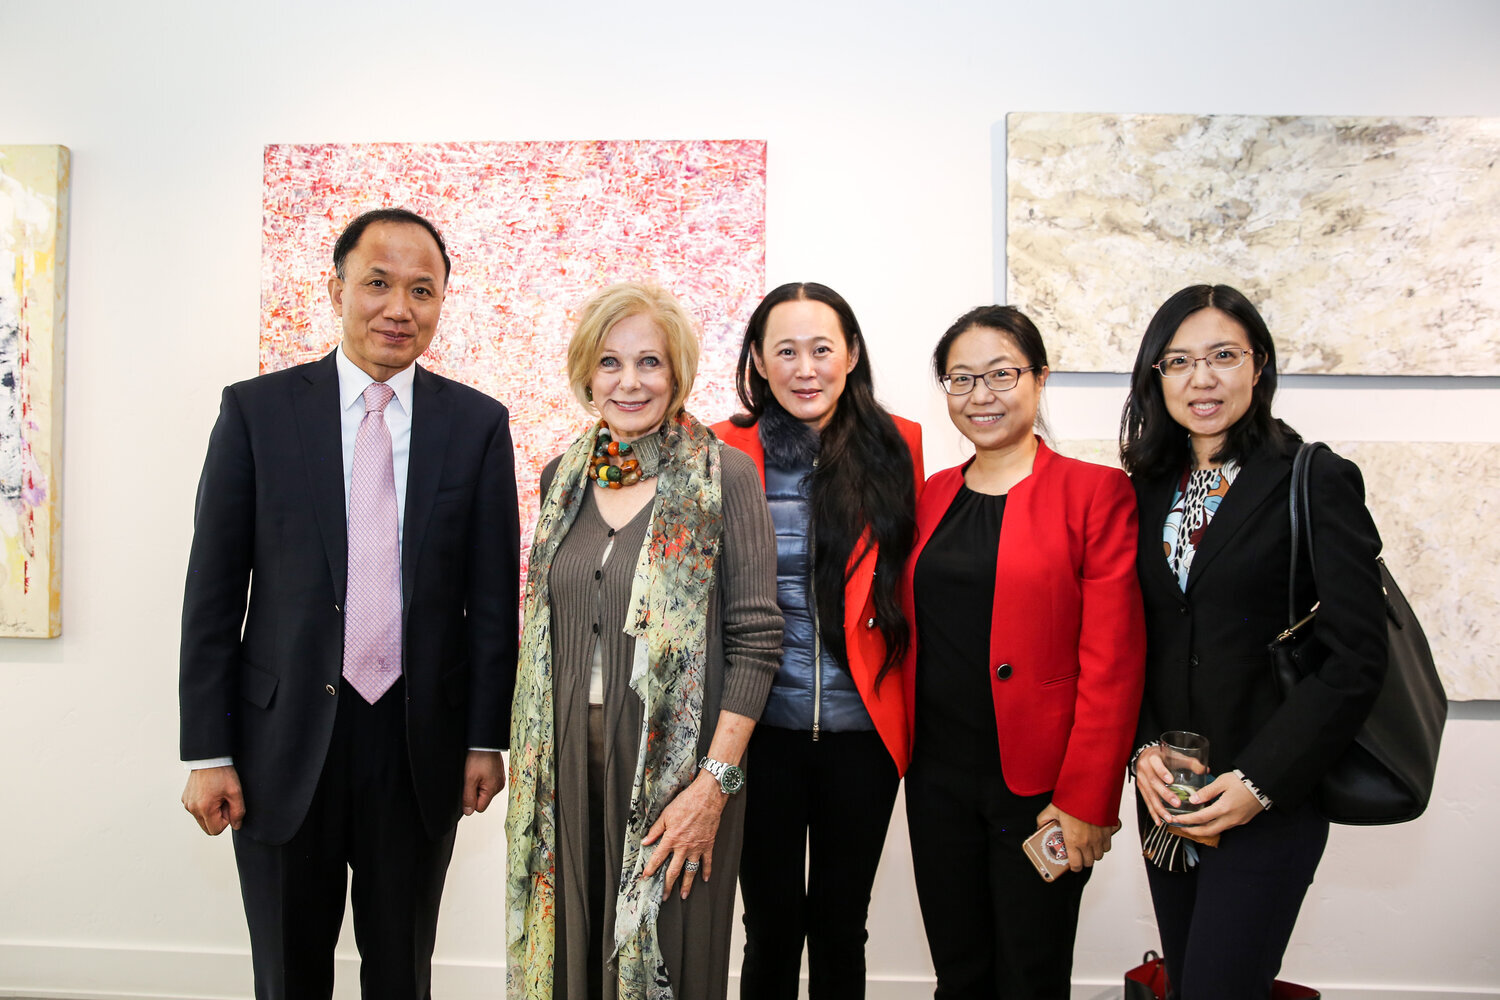 Susan with Naja Lockwood and Chinese Embassy Officials